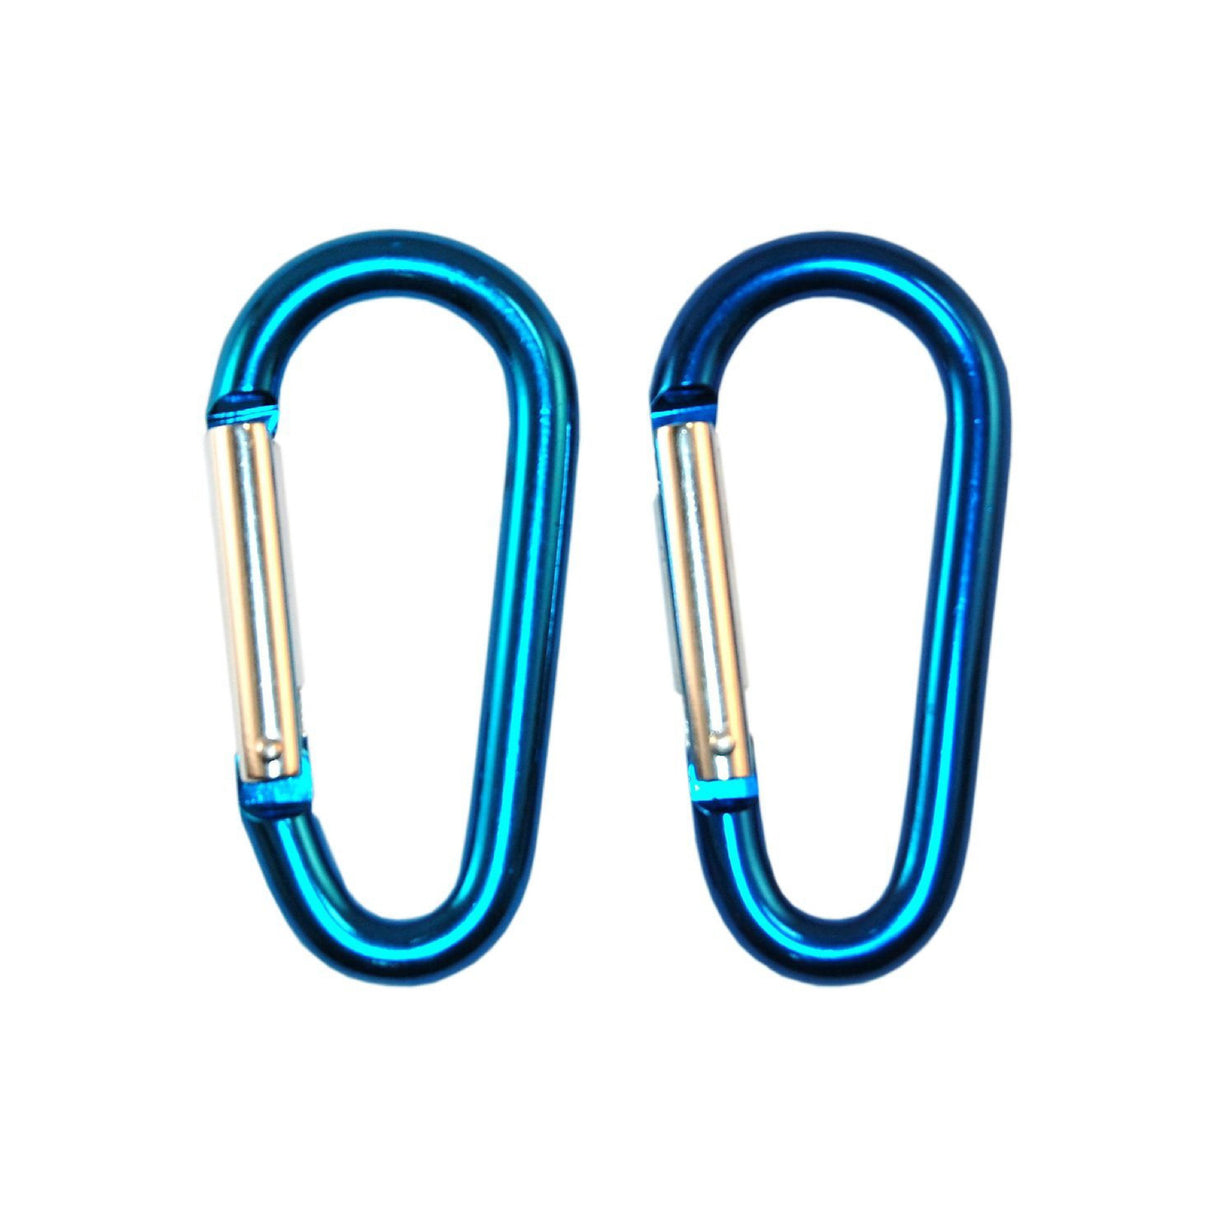 BEAVER ONE PAIR OF ROUALLOY CARABINERS